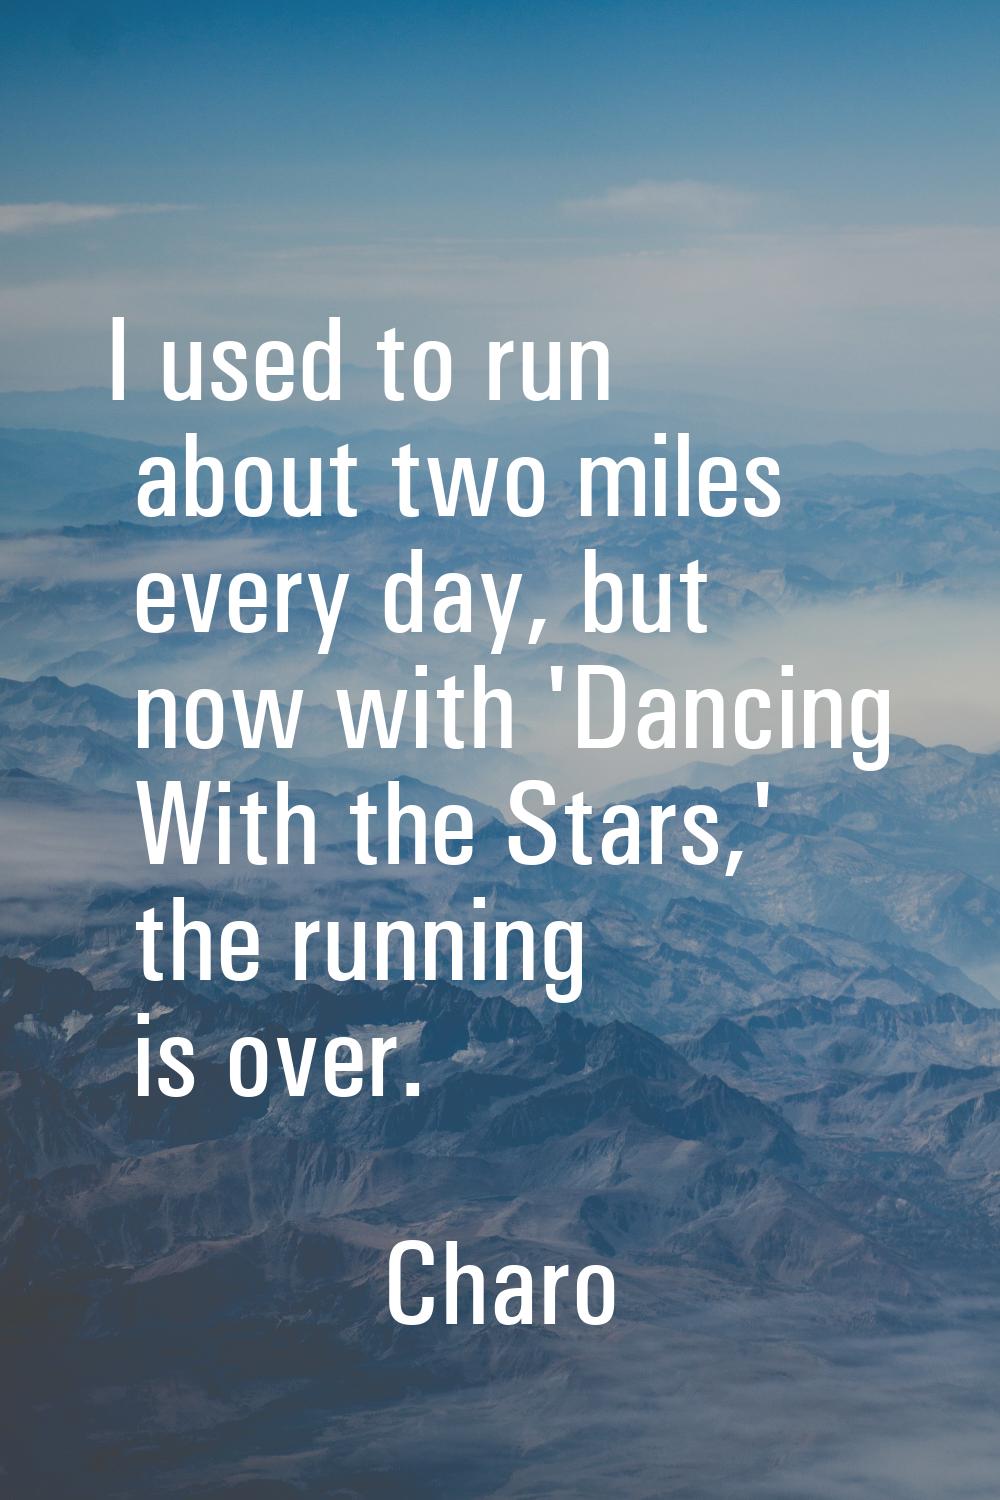 I used to run about two miles every day, but now with 'Dancing With the Stars,' the running is over